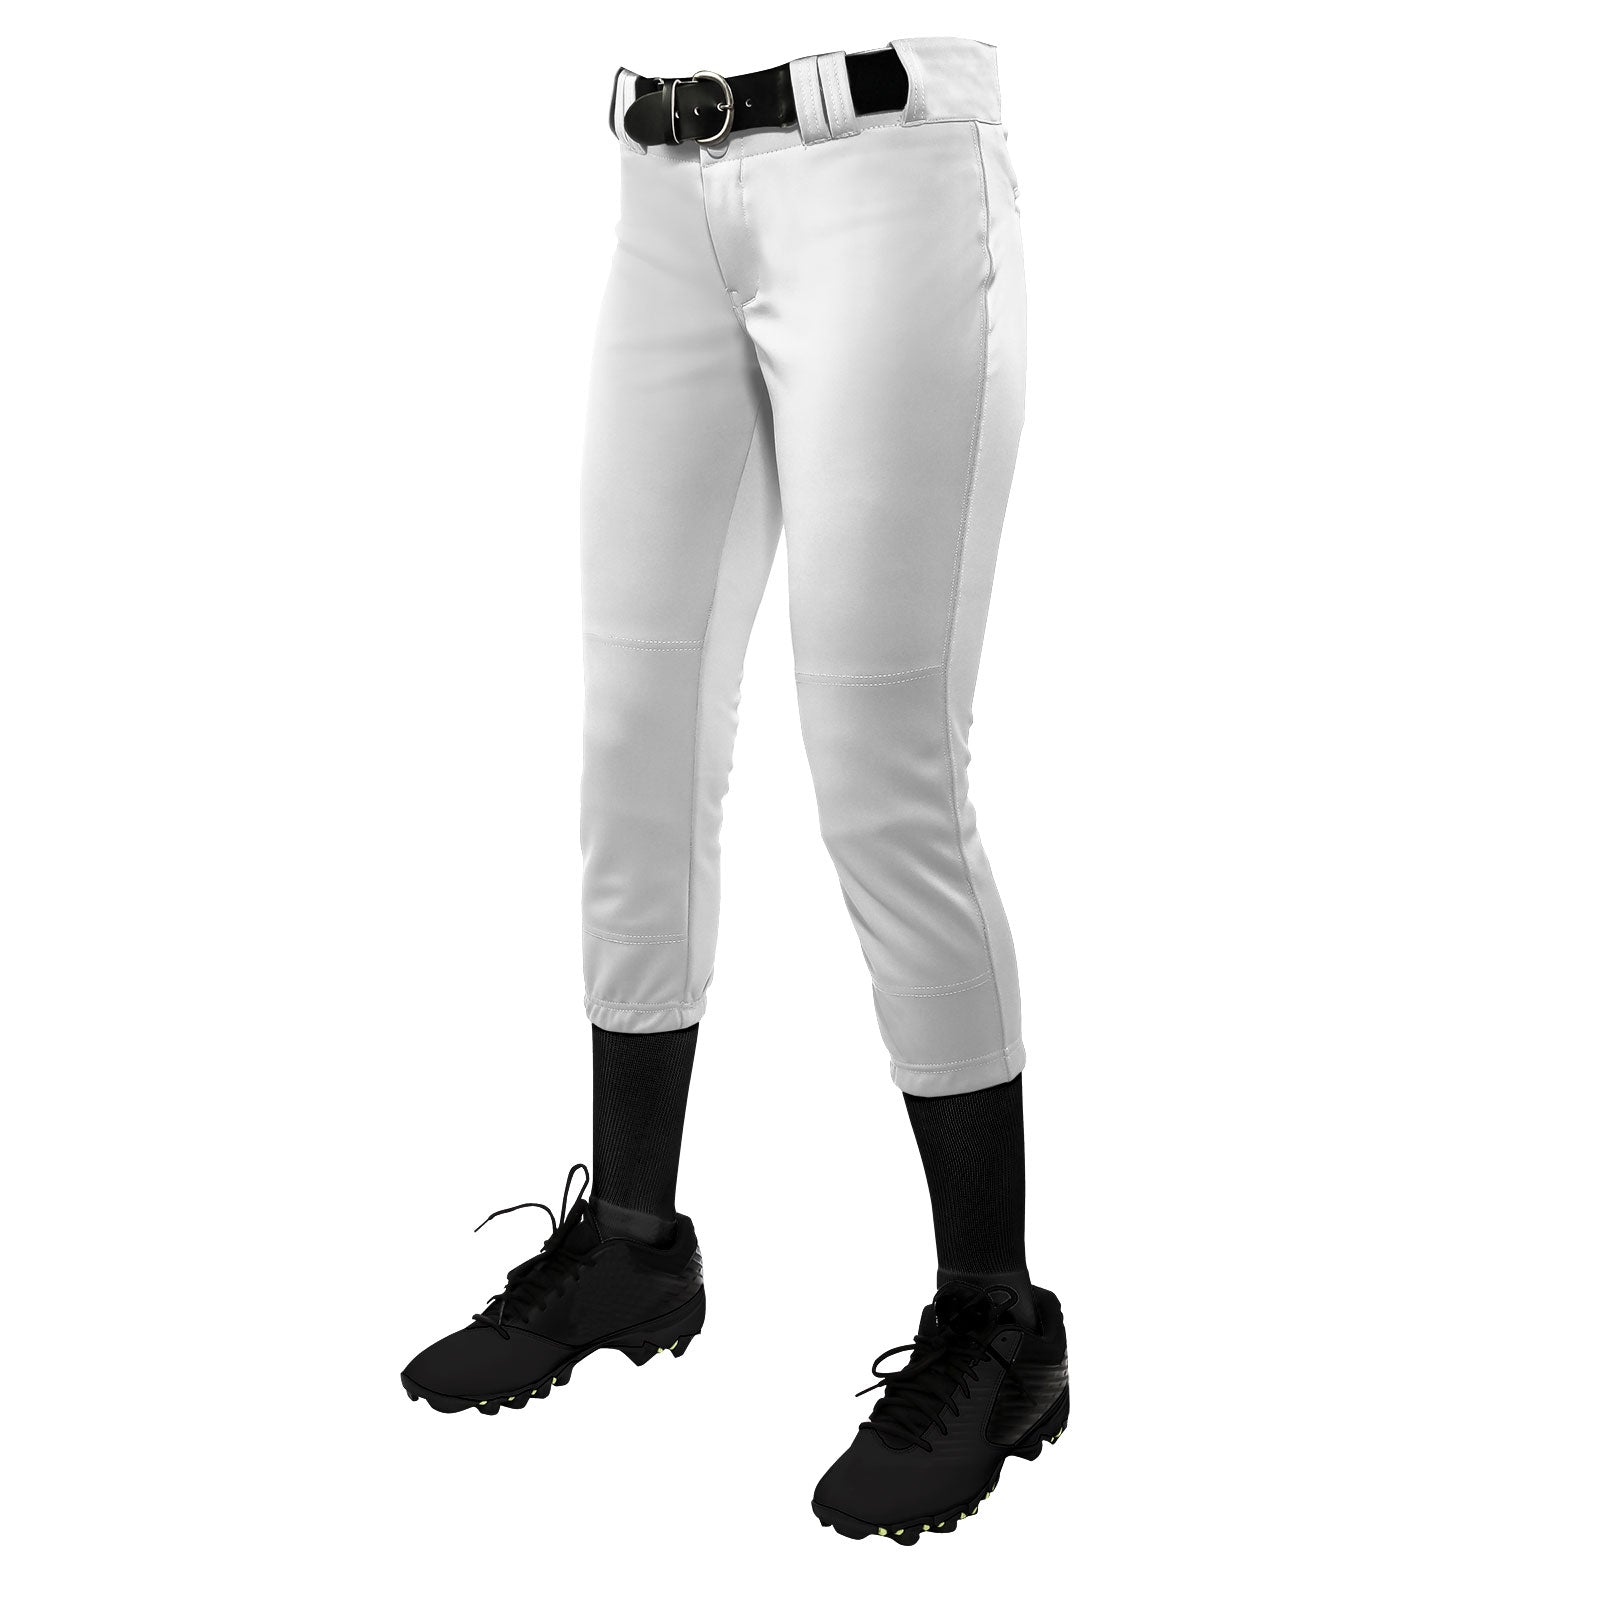 Tournament Women's/Girls Traditional Low-Rise Pants 6-Colors Available - AtlanticCoastSports